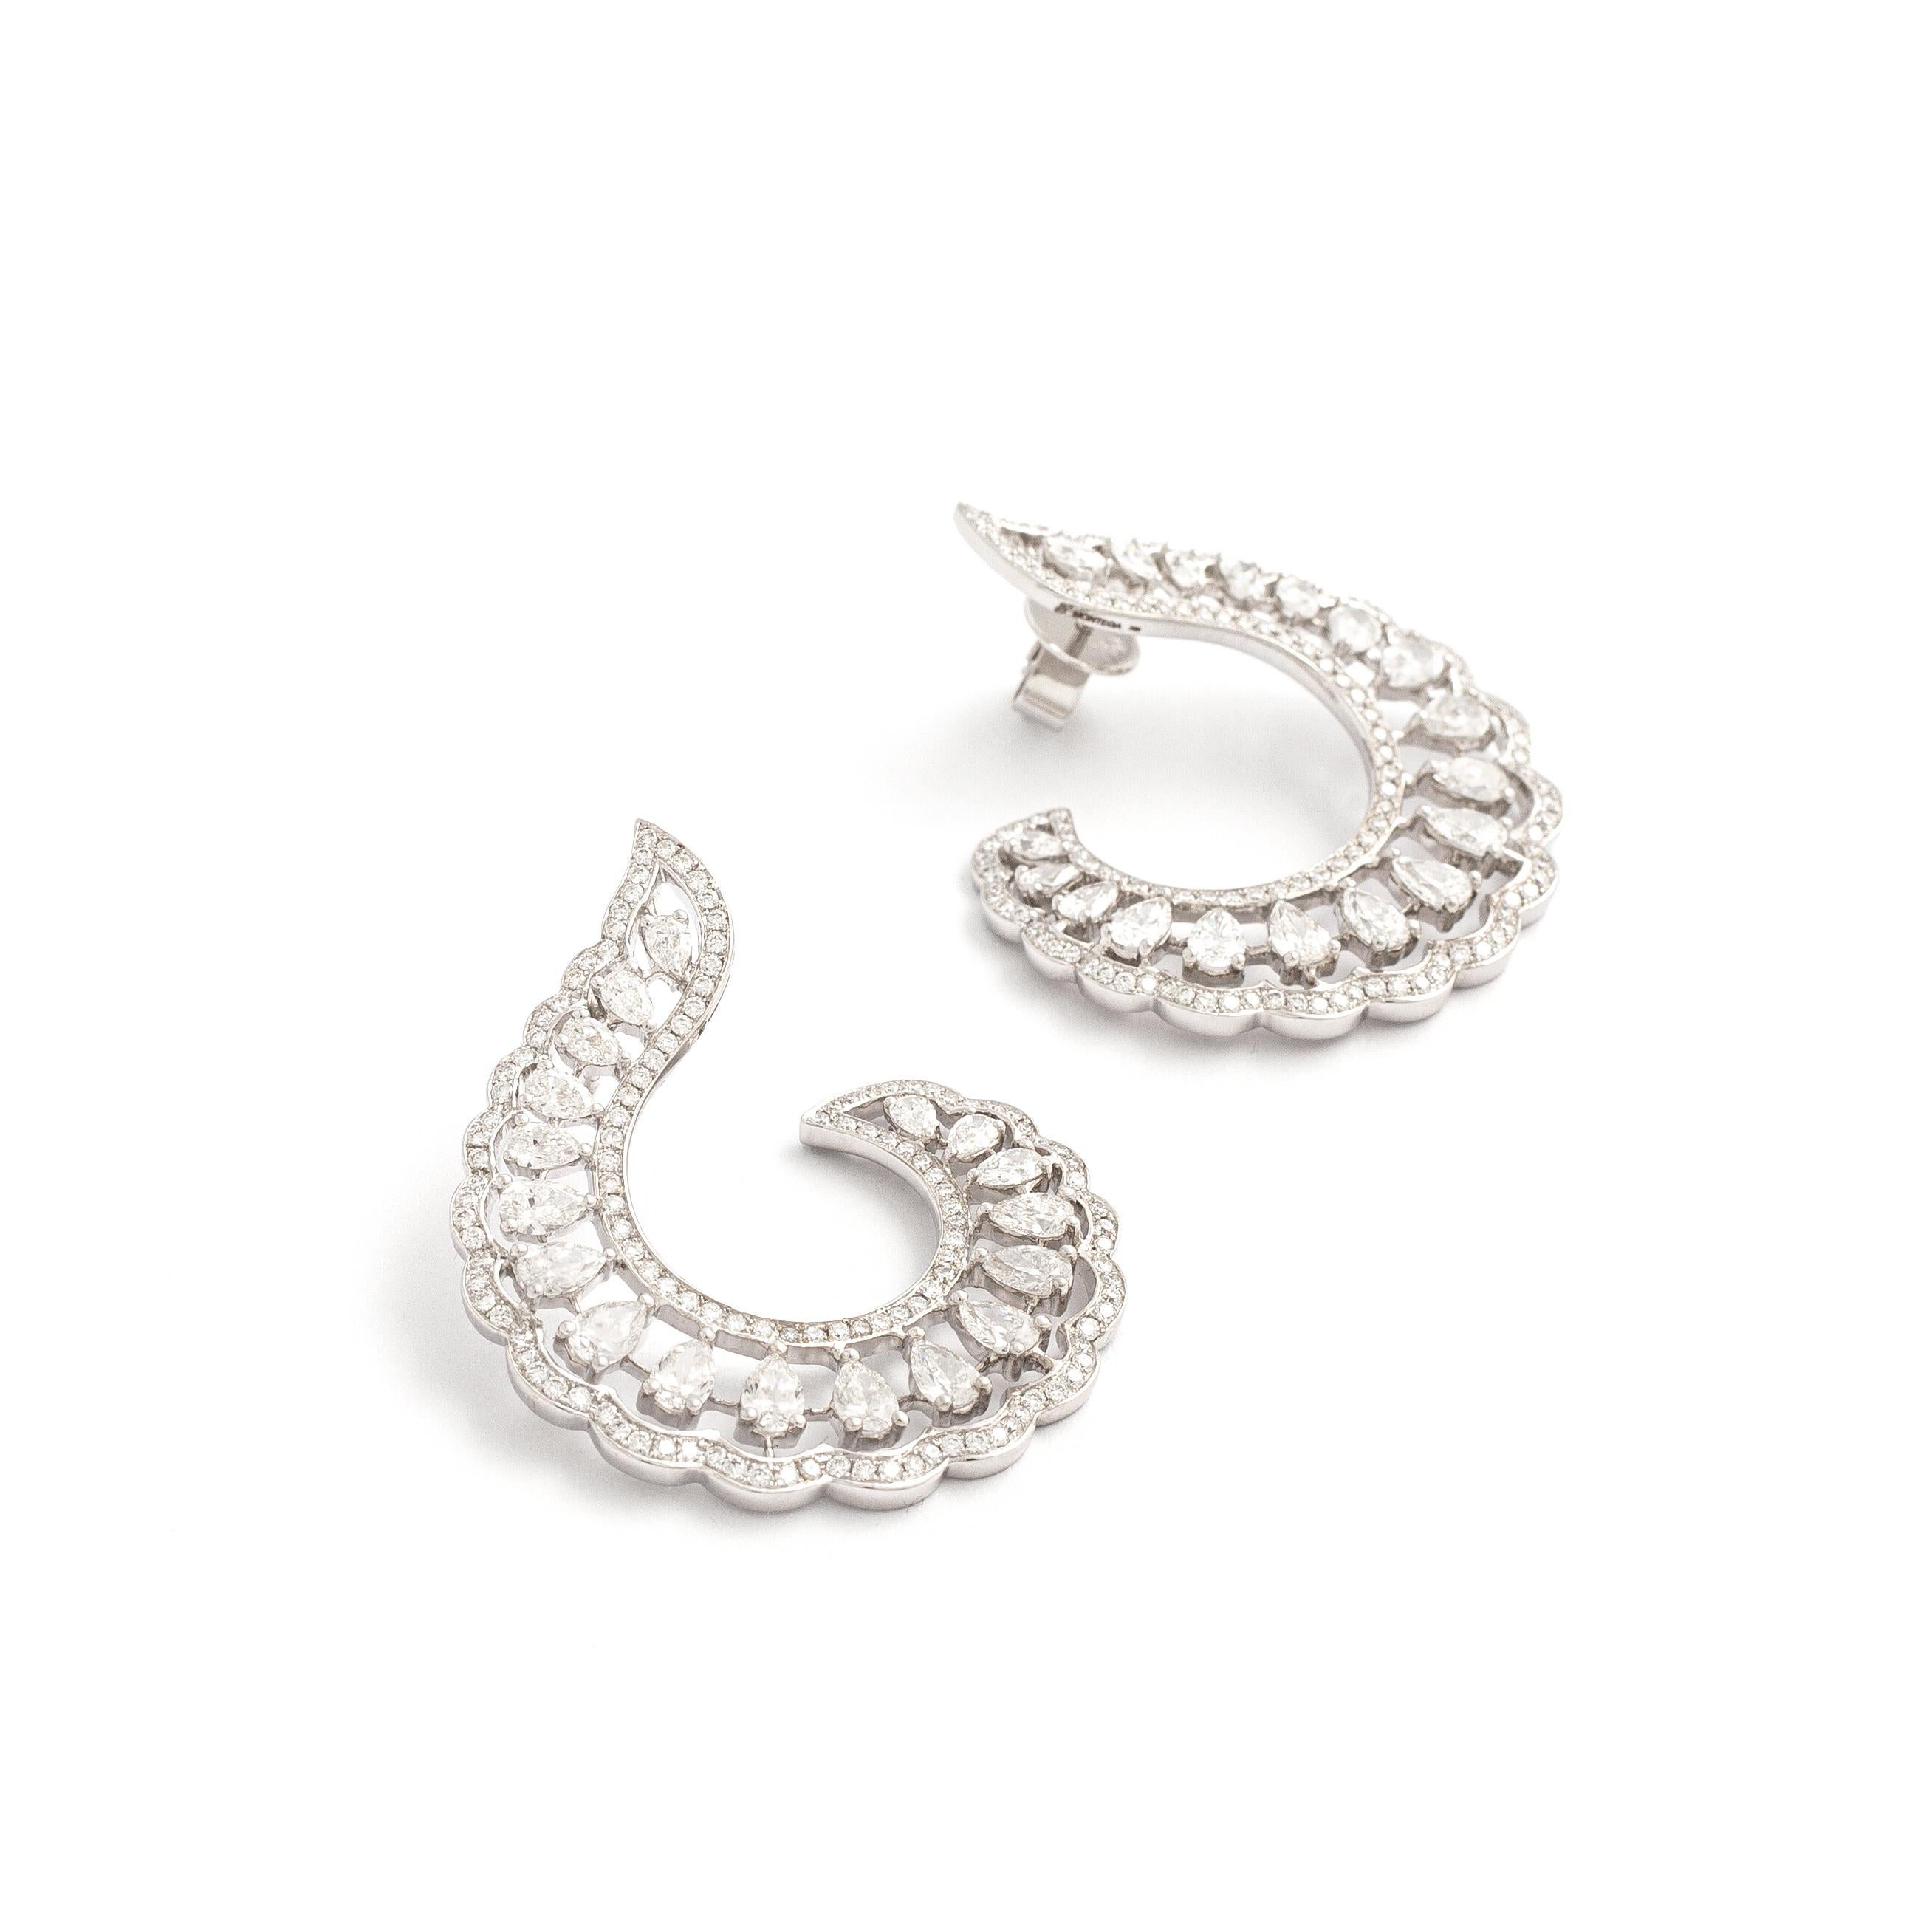 Earrings in 18kt white gold set with 256 diamonds 1.44 cts and pear-shaped cut diamonds 4.08 cts.

Length: 3.80 centimeters (1.50 inches).

Maximum Width: 3.30 centimeters (1.30 inches).

Total weight: 14.54 grams.  